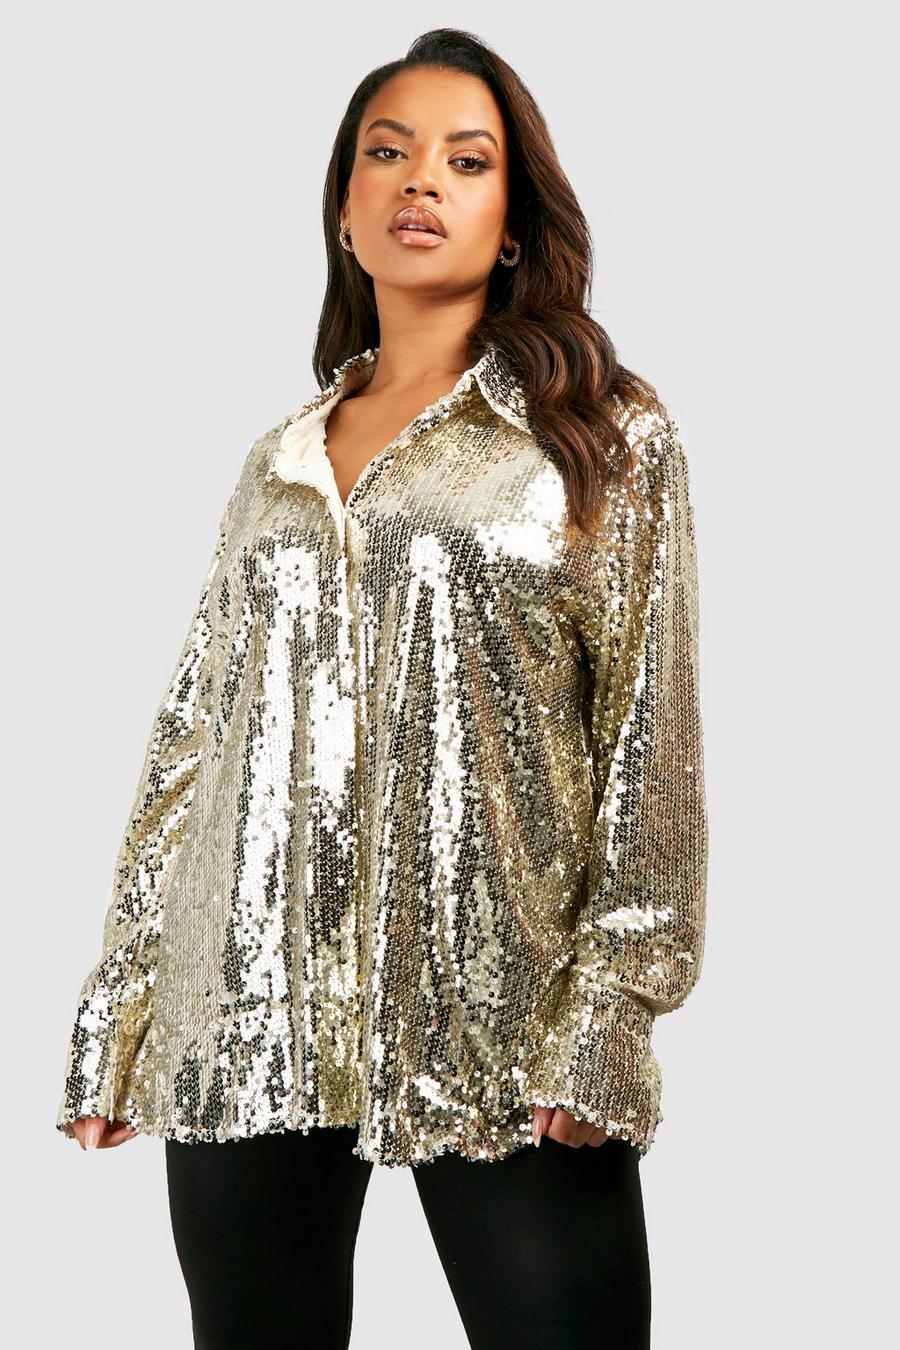 Champagne beis Plus Oversized Deep Cuff Sequin Shirt 